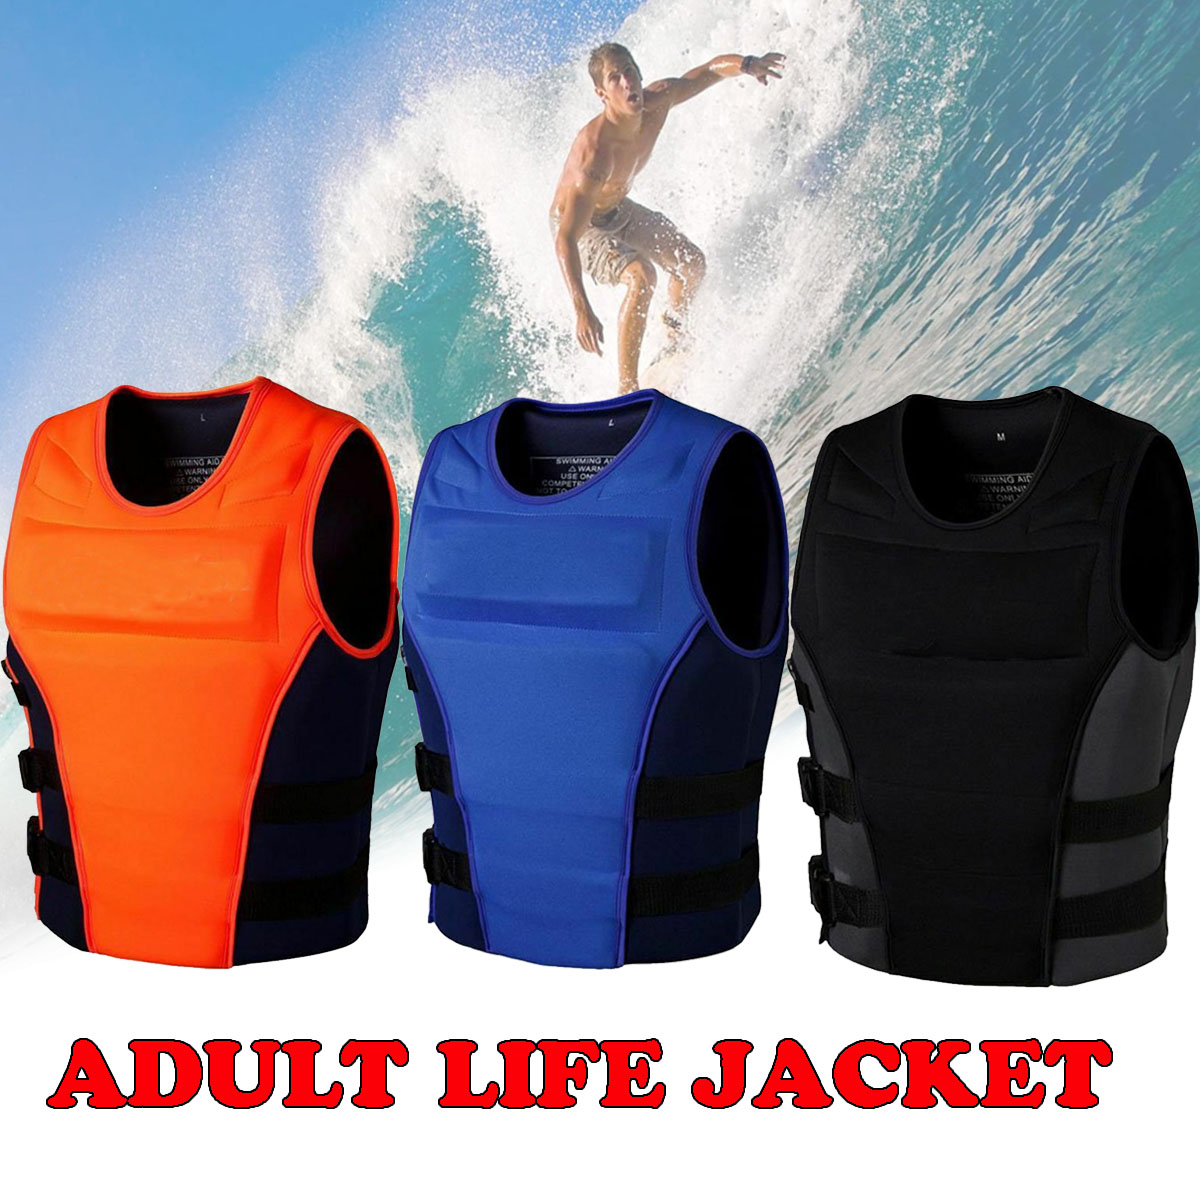 Outdoor-Rafting-Life-Jacket-for-Adult-Swimming-Snorkeling-Wear-Professional-Surfing-Aid-Life-Vest-1748600-1